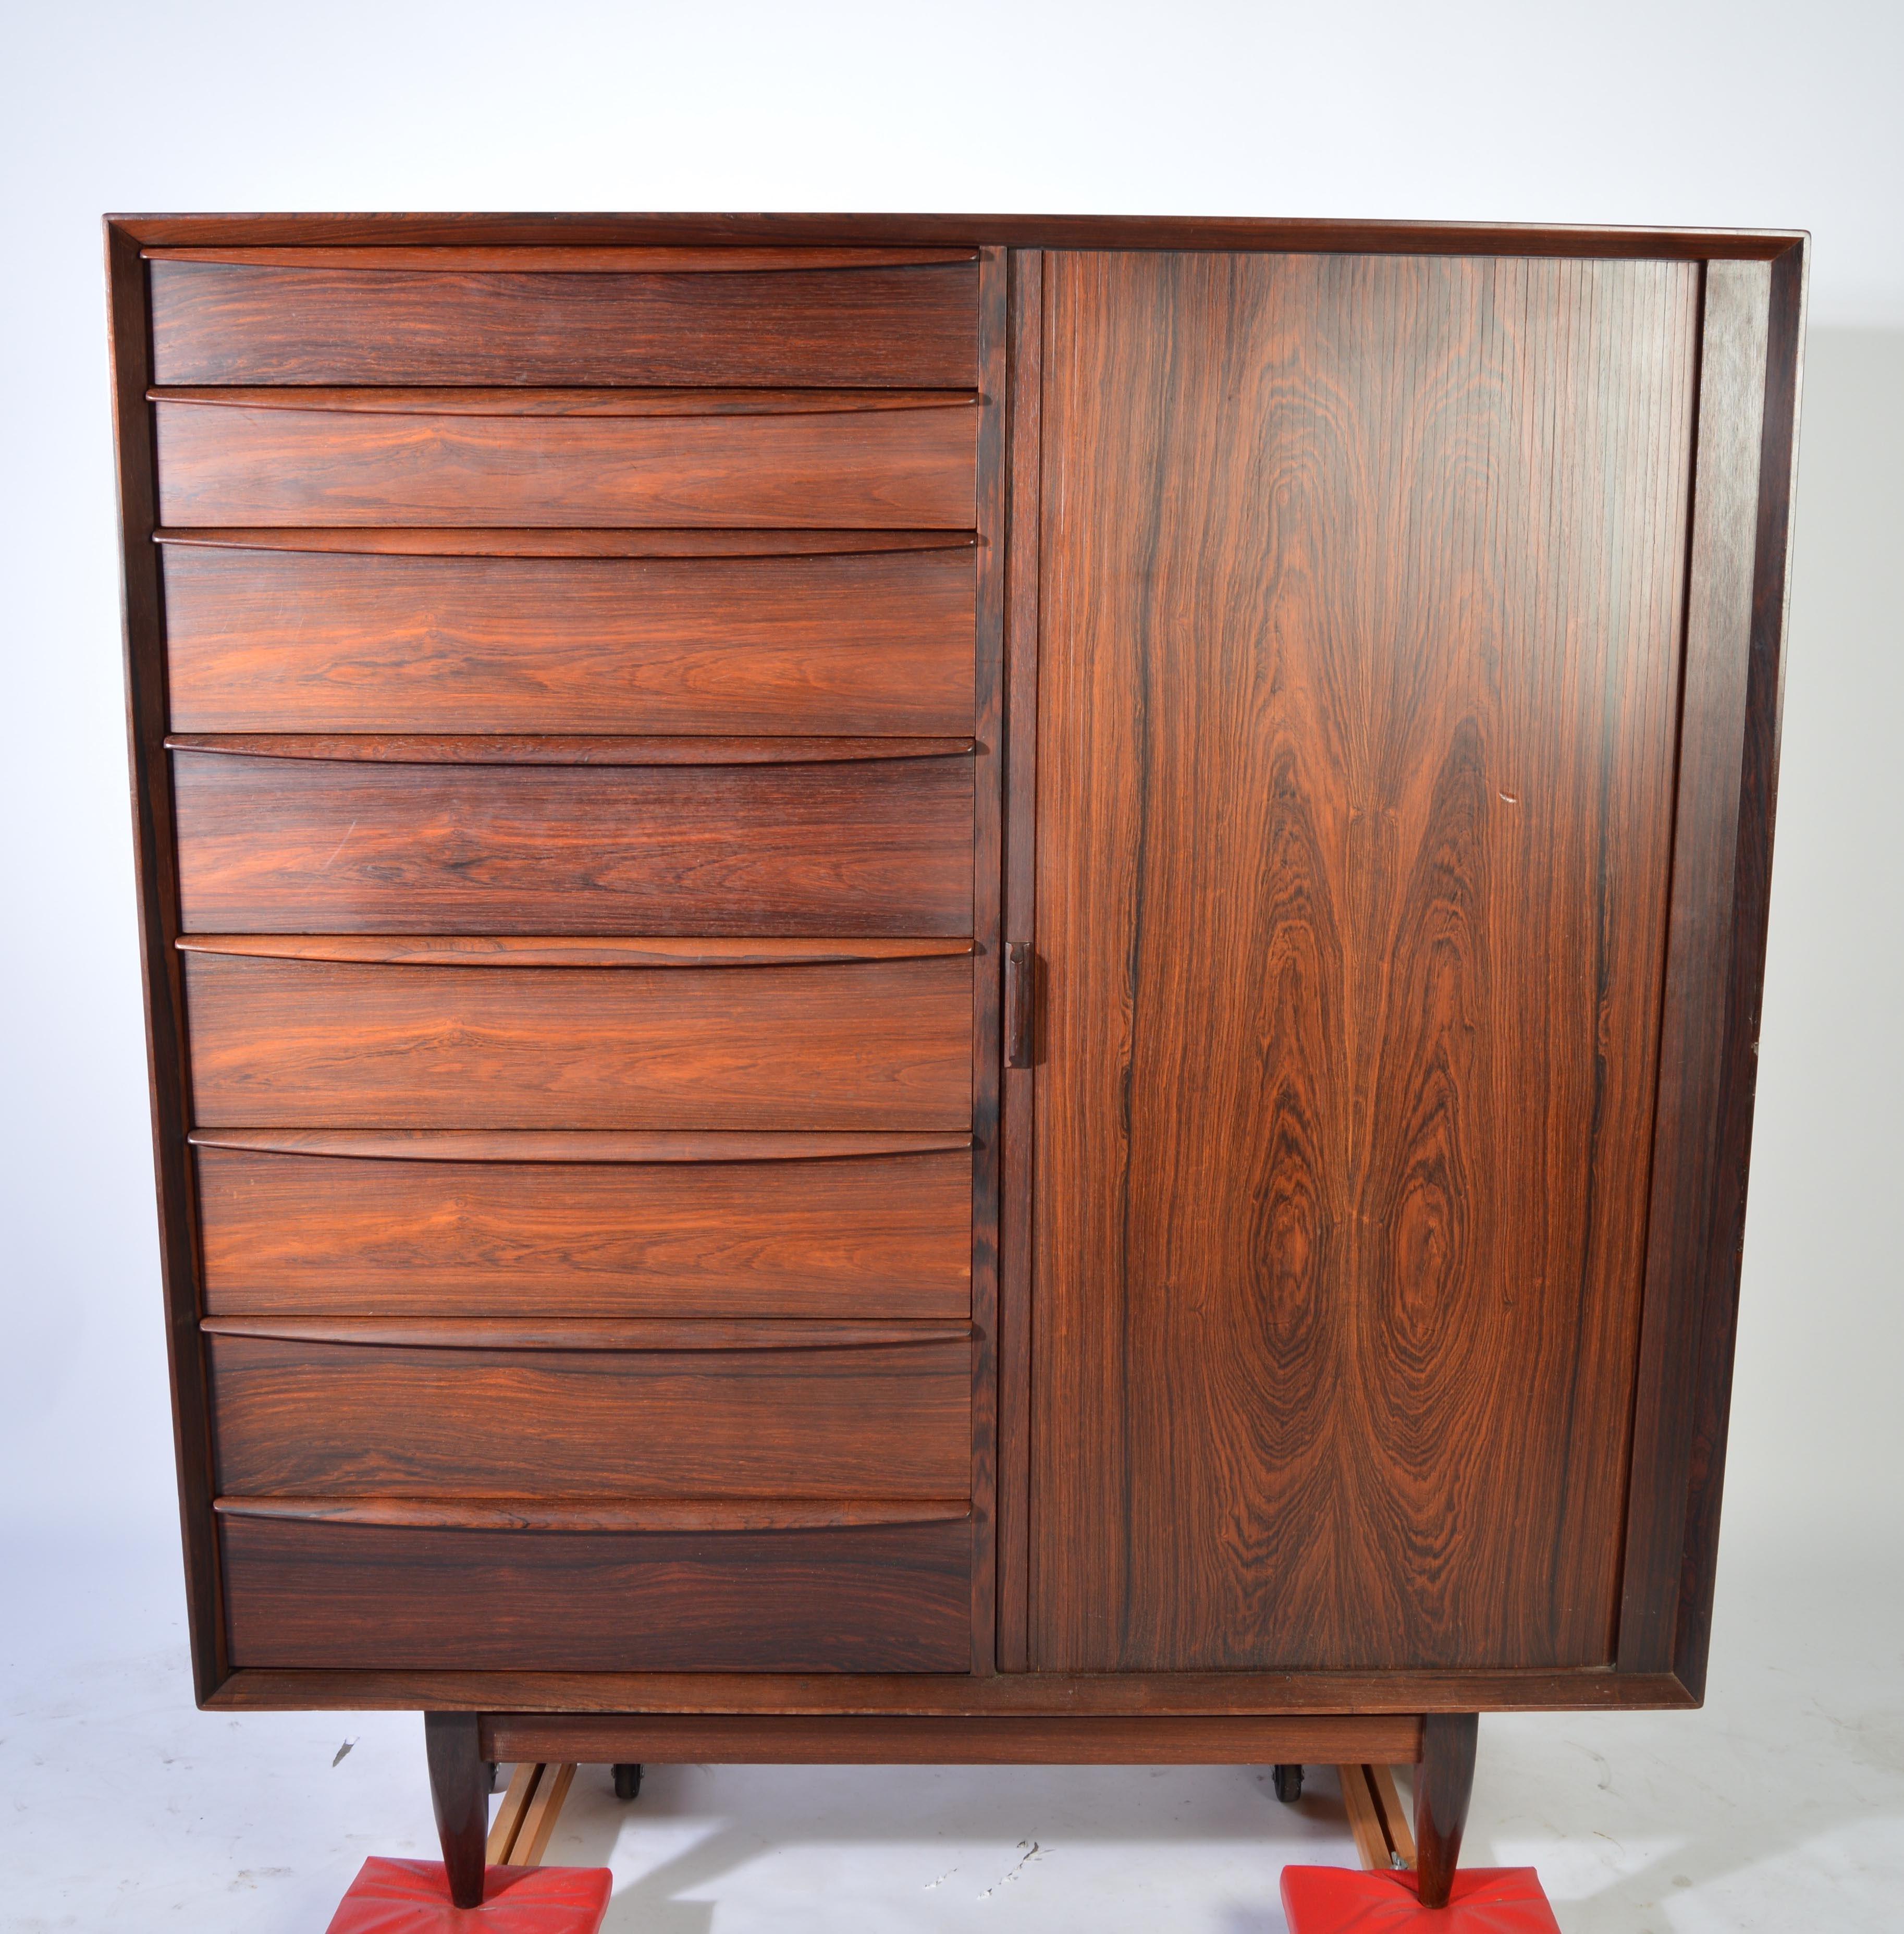 A stunning chest of drawers in Brazilian rosewood designed by Svend Madsen for Falster Denmark having 8 drawers on the left and 9 drawers on the right which are tucked behind a top to bottom Tambour door.
Quite beautiful in rosewood.
Great overall